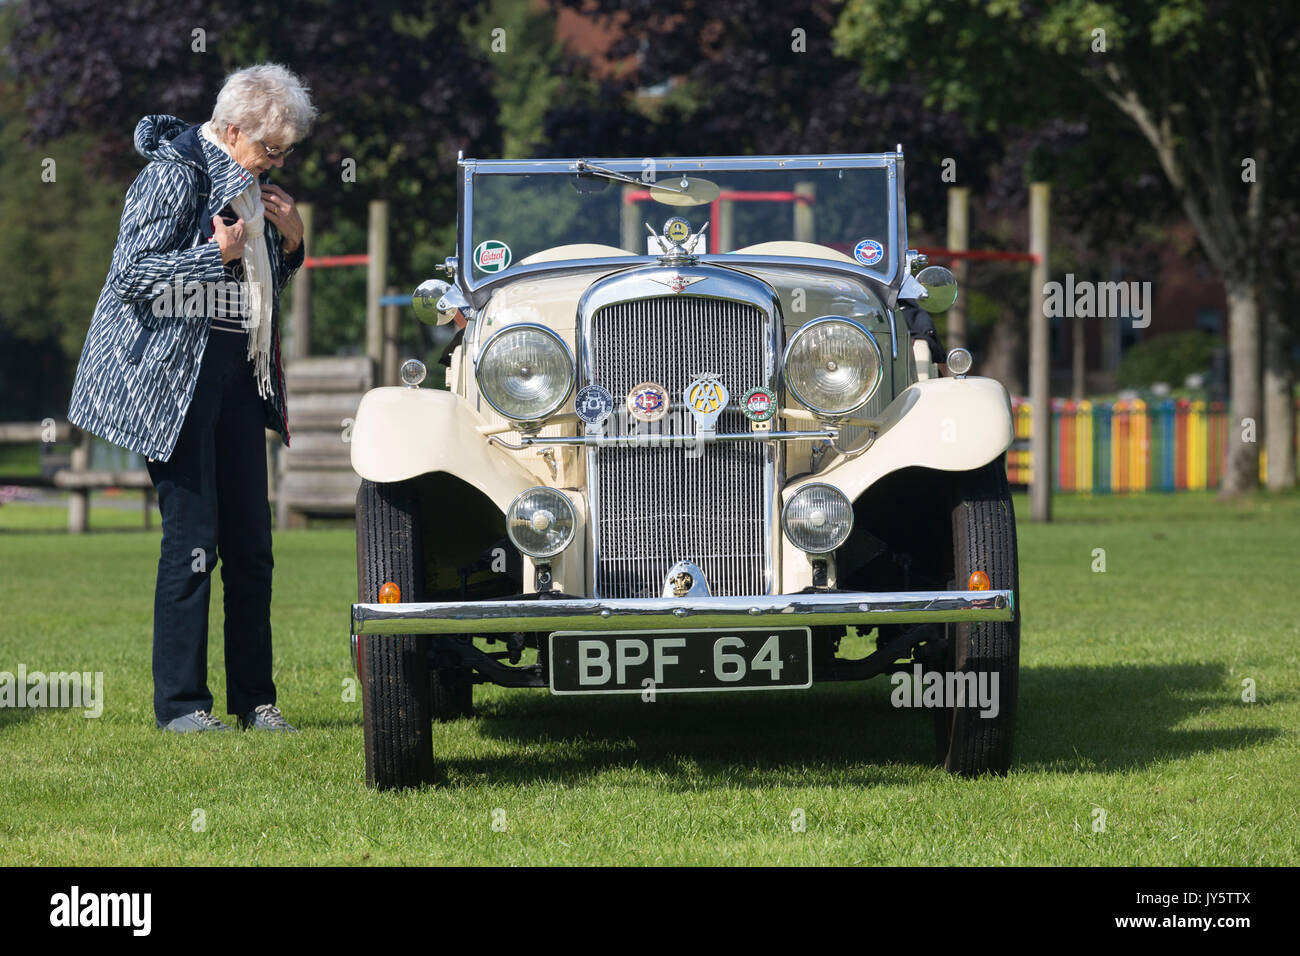 Woman at classic vintage car rally next to open-top vehicle Stock Photo